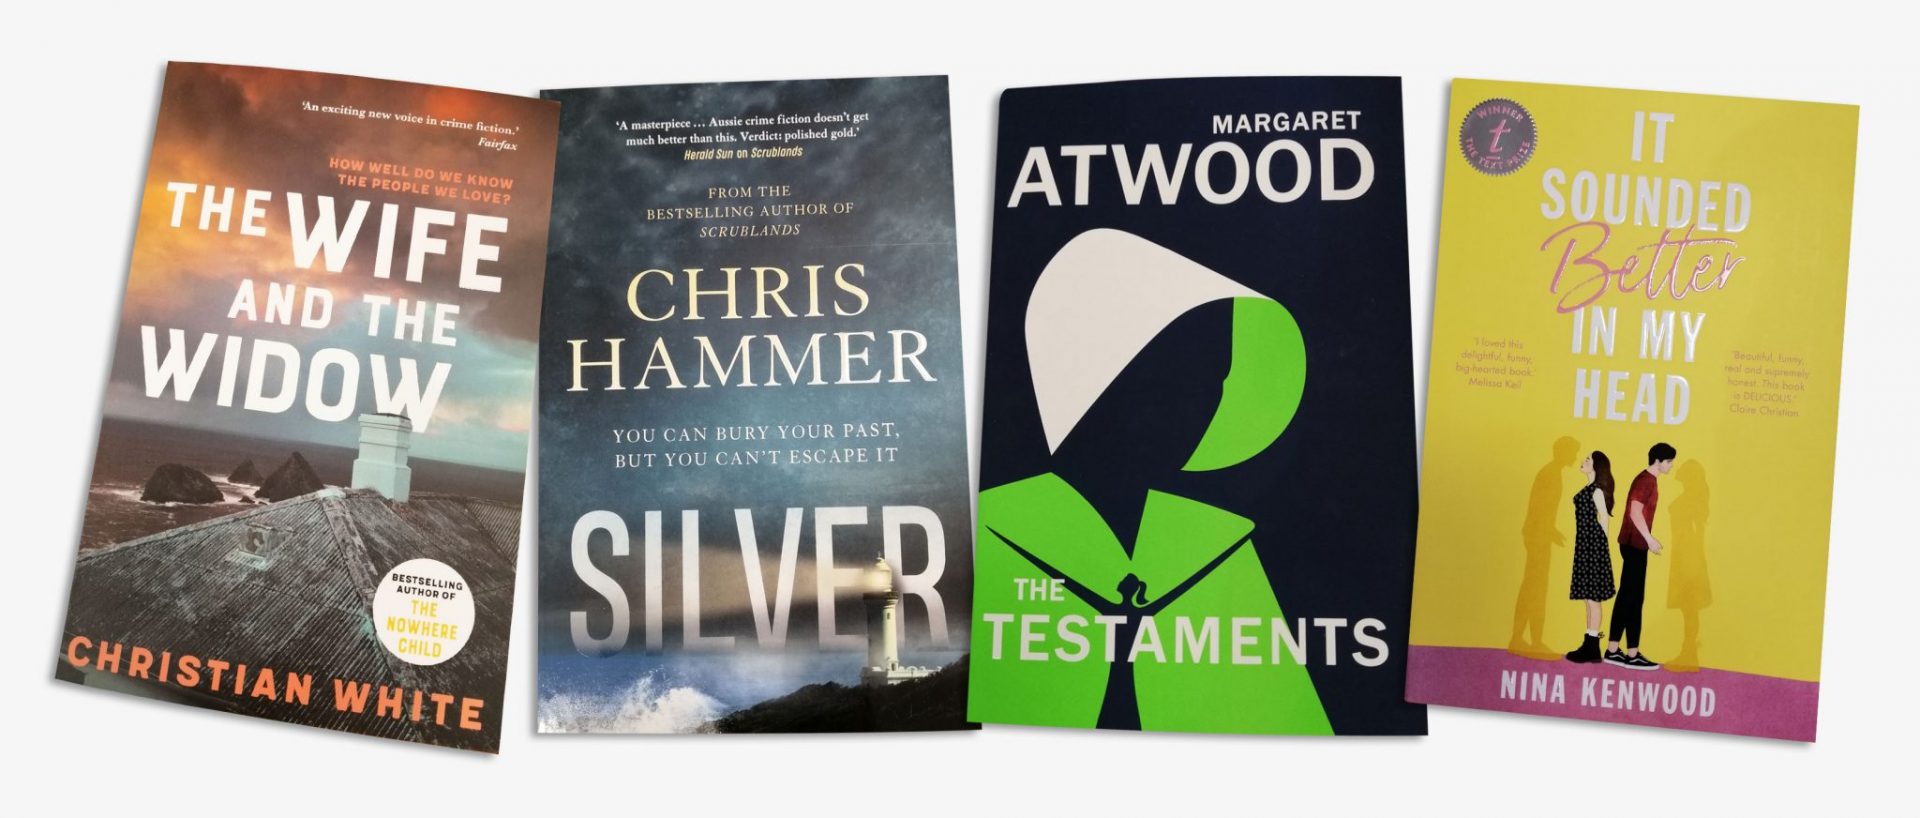 Book Face Port Macquarie share their recommended reads for Summer 2019/20